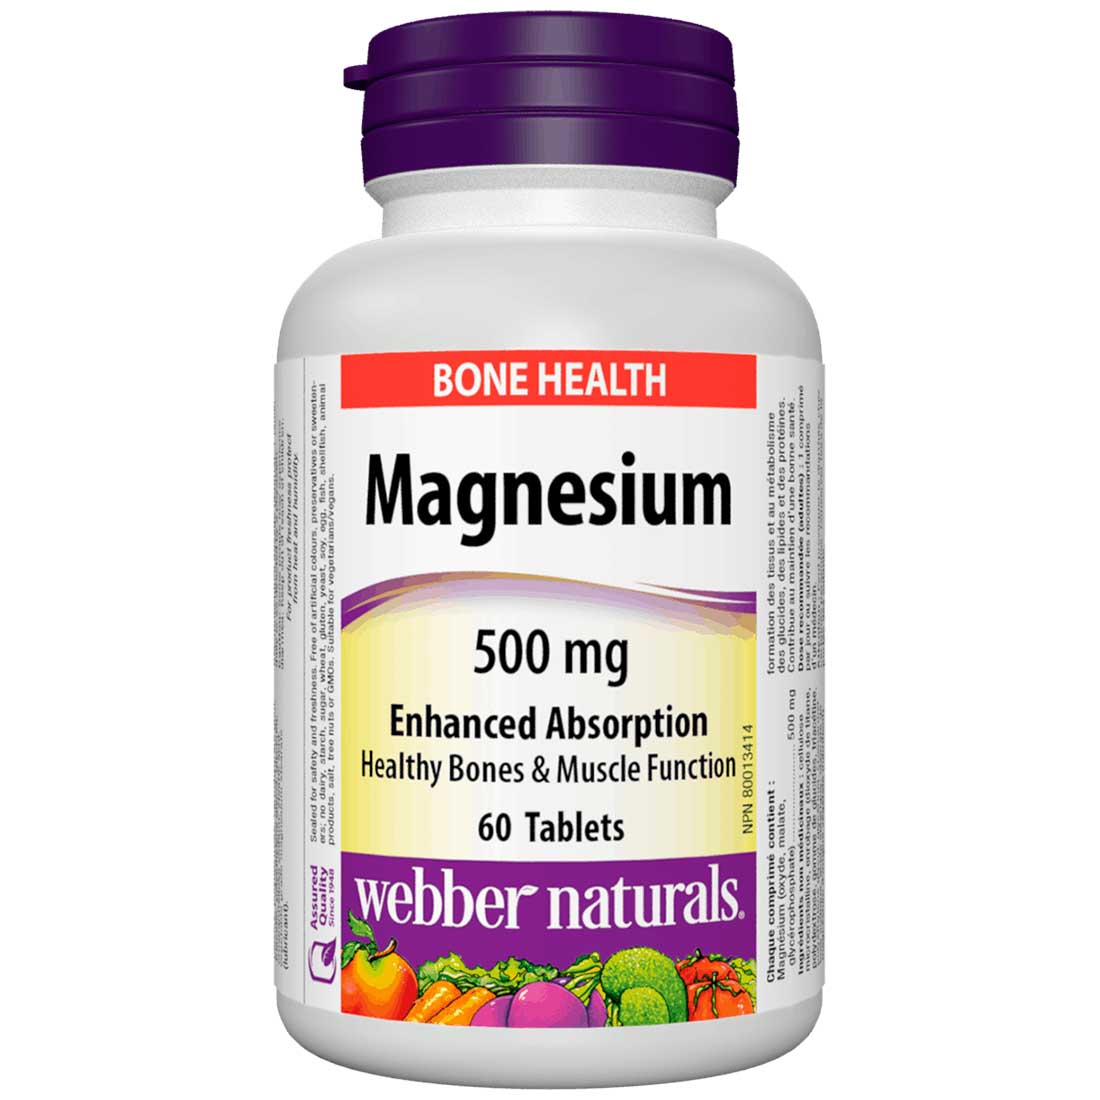 Webber Naturals Magnesium 500mg, Chelated for Enhanced Absorption, 60 Tablets